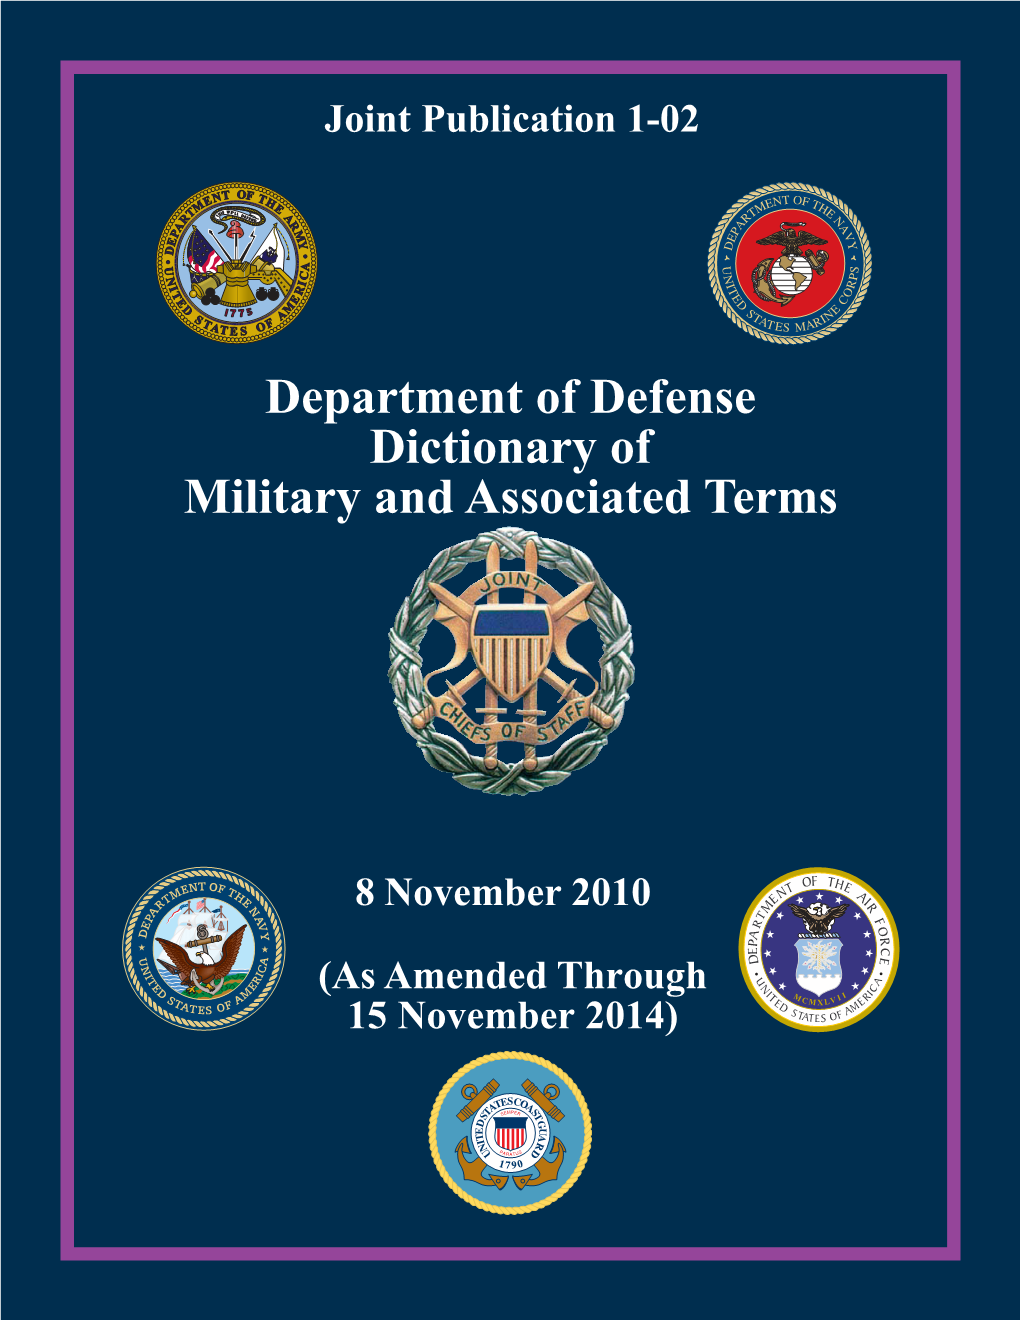 JP 1-02, Department of Defense Dictionary of Military and Associated Terms, 12 April 2001